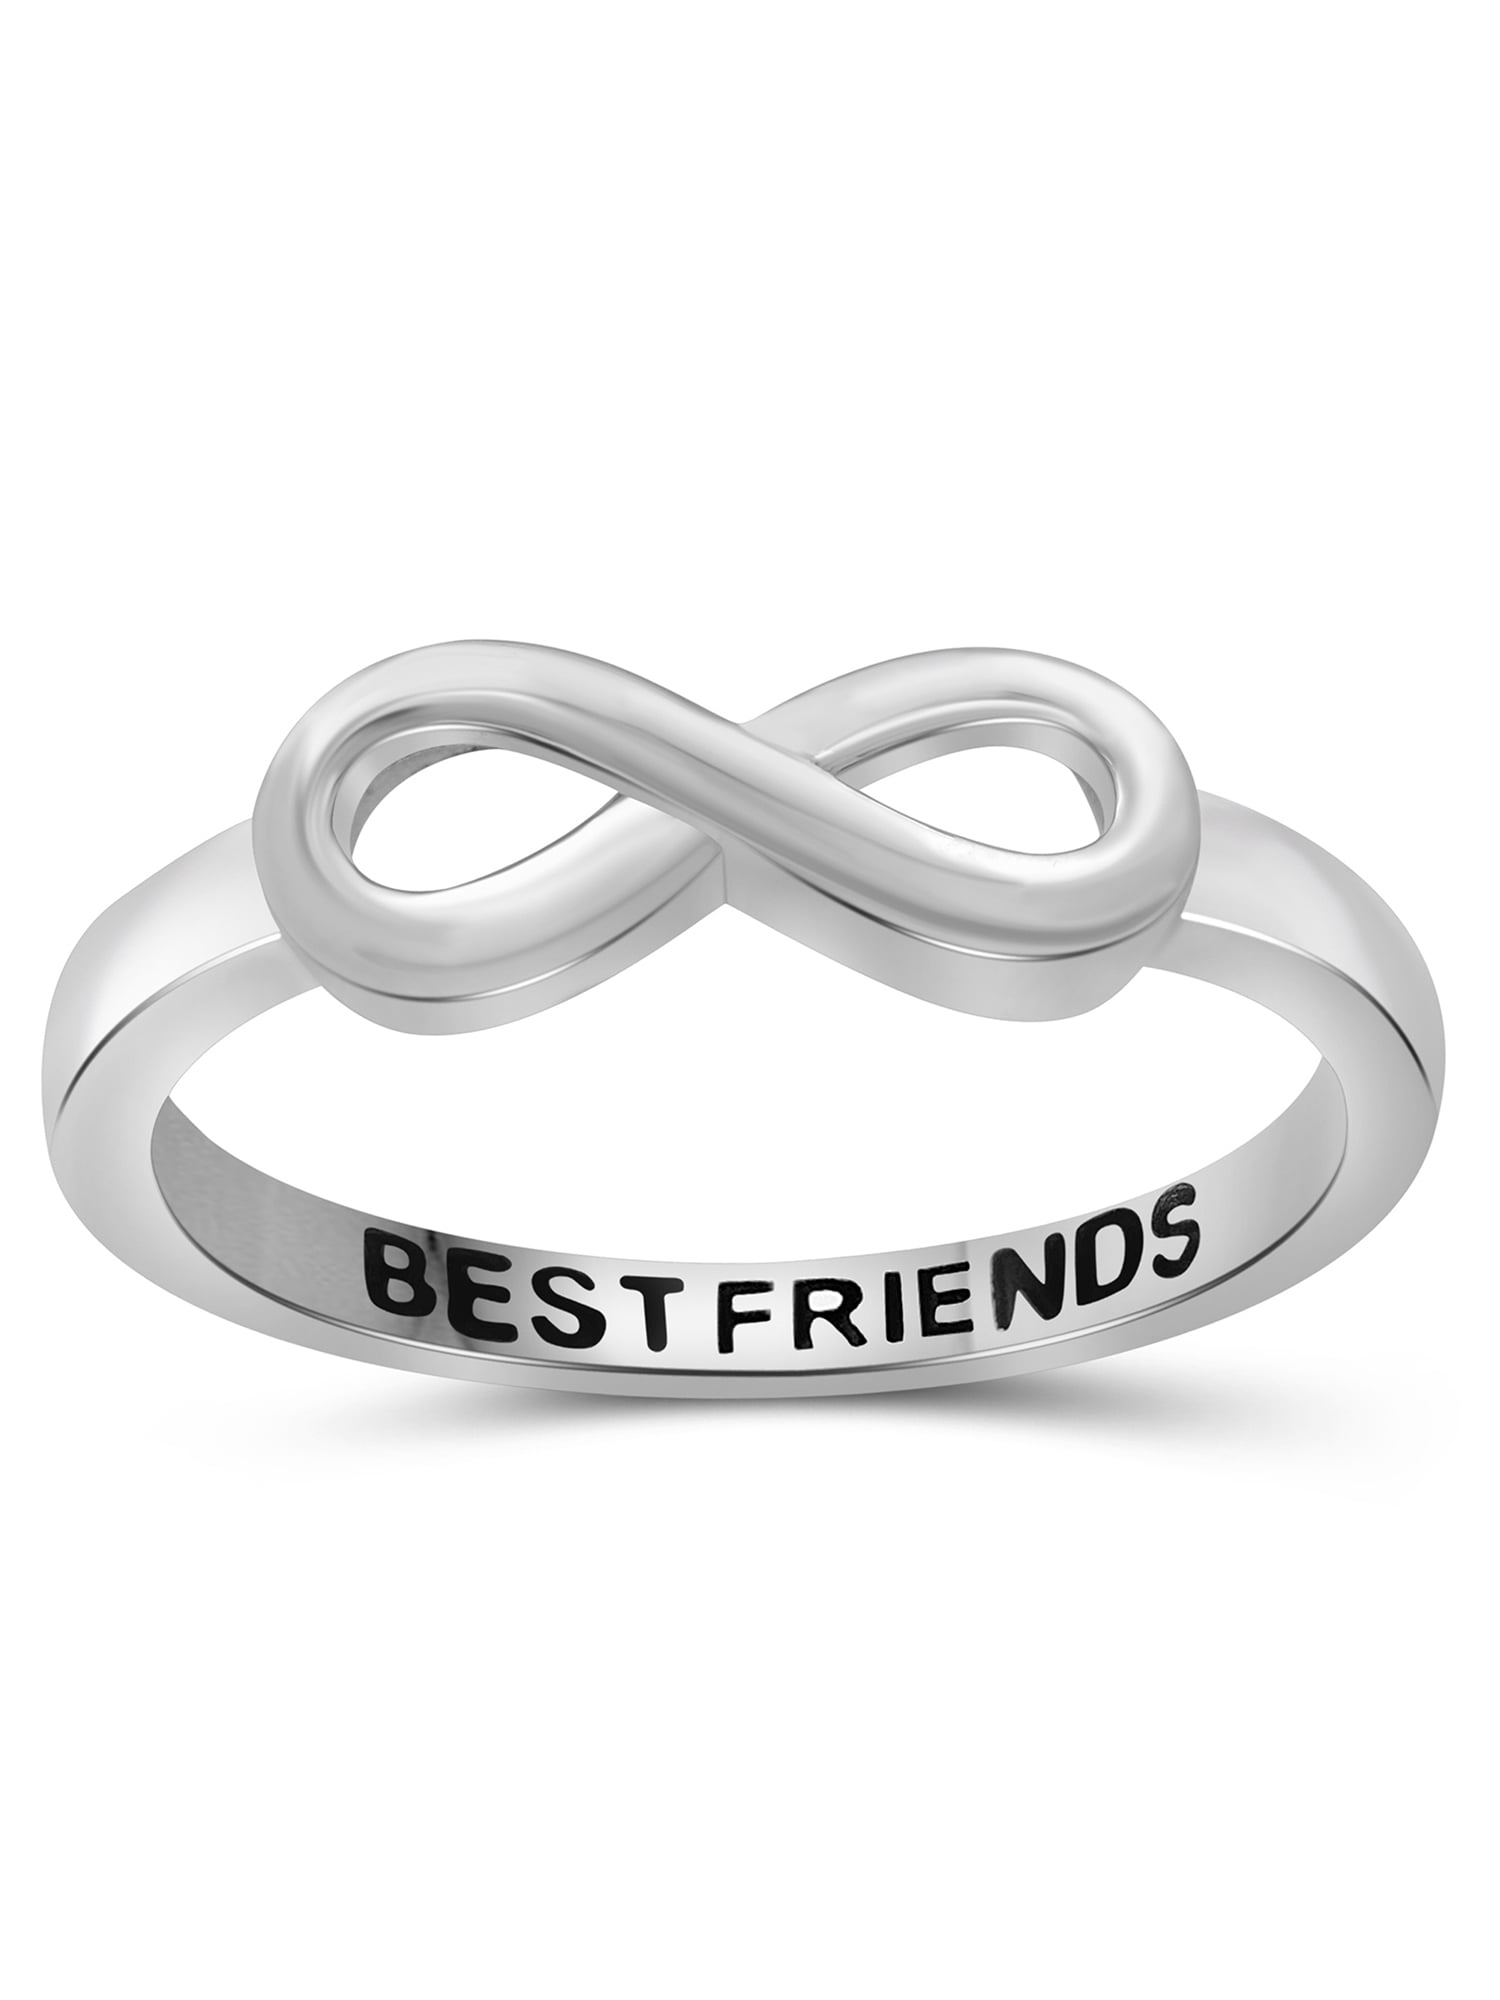 4 Mm Silver BEST FRIEND RINGS for 4 Bff Four Friendship Bestfriend Ring Set  for Forever Friend Name Engraved Rings for 4 5 6 7 8 3 2 Friends - Etsy